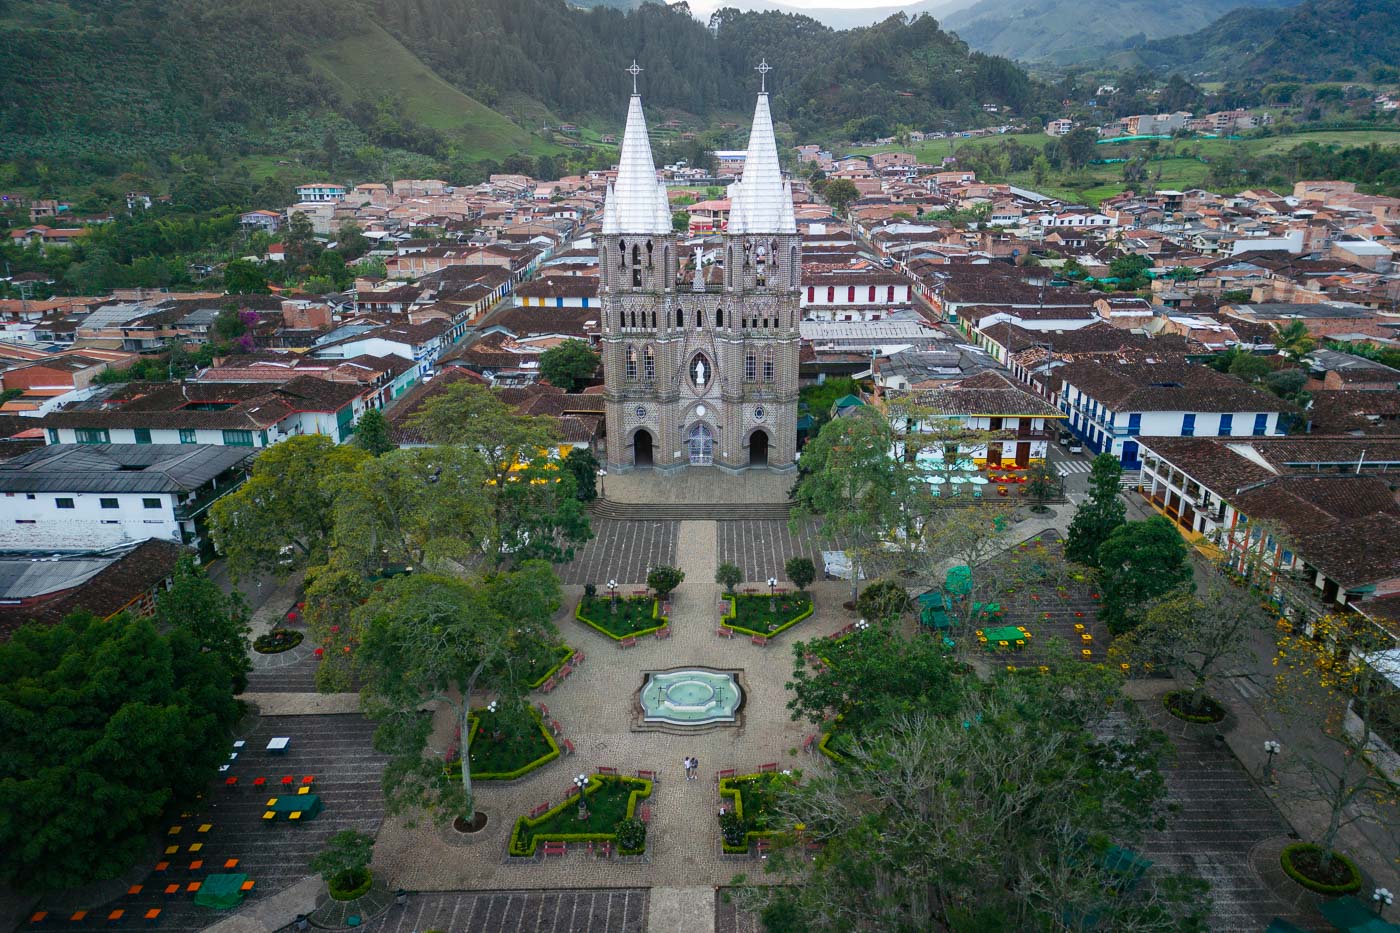 An aerial view of Ryan and Sara in Plaza de Libertador with the Basilica of Immaculate Conception as the main focus.